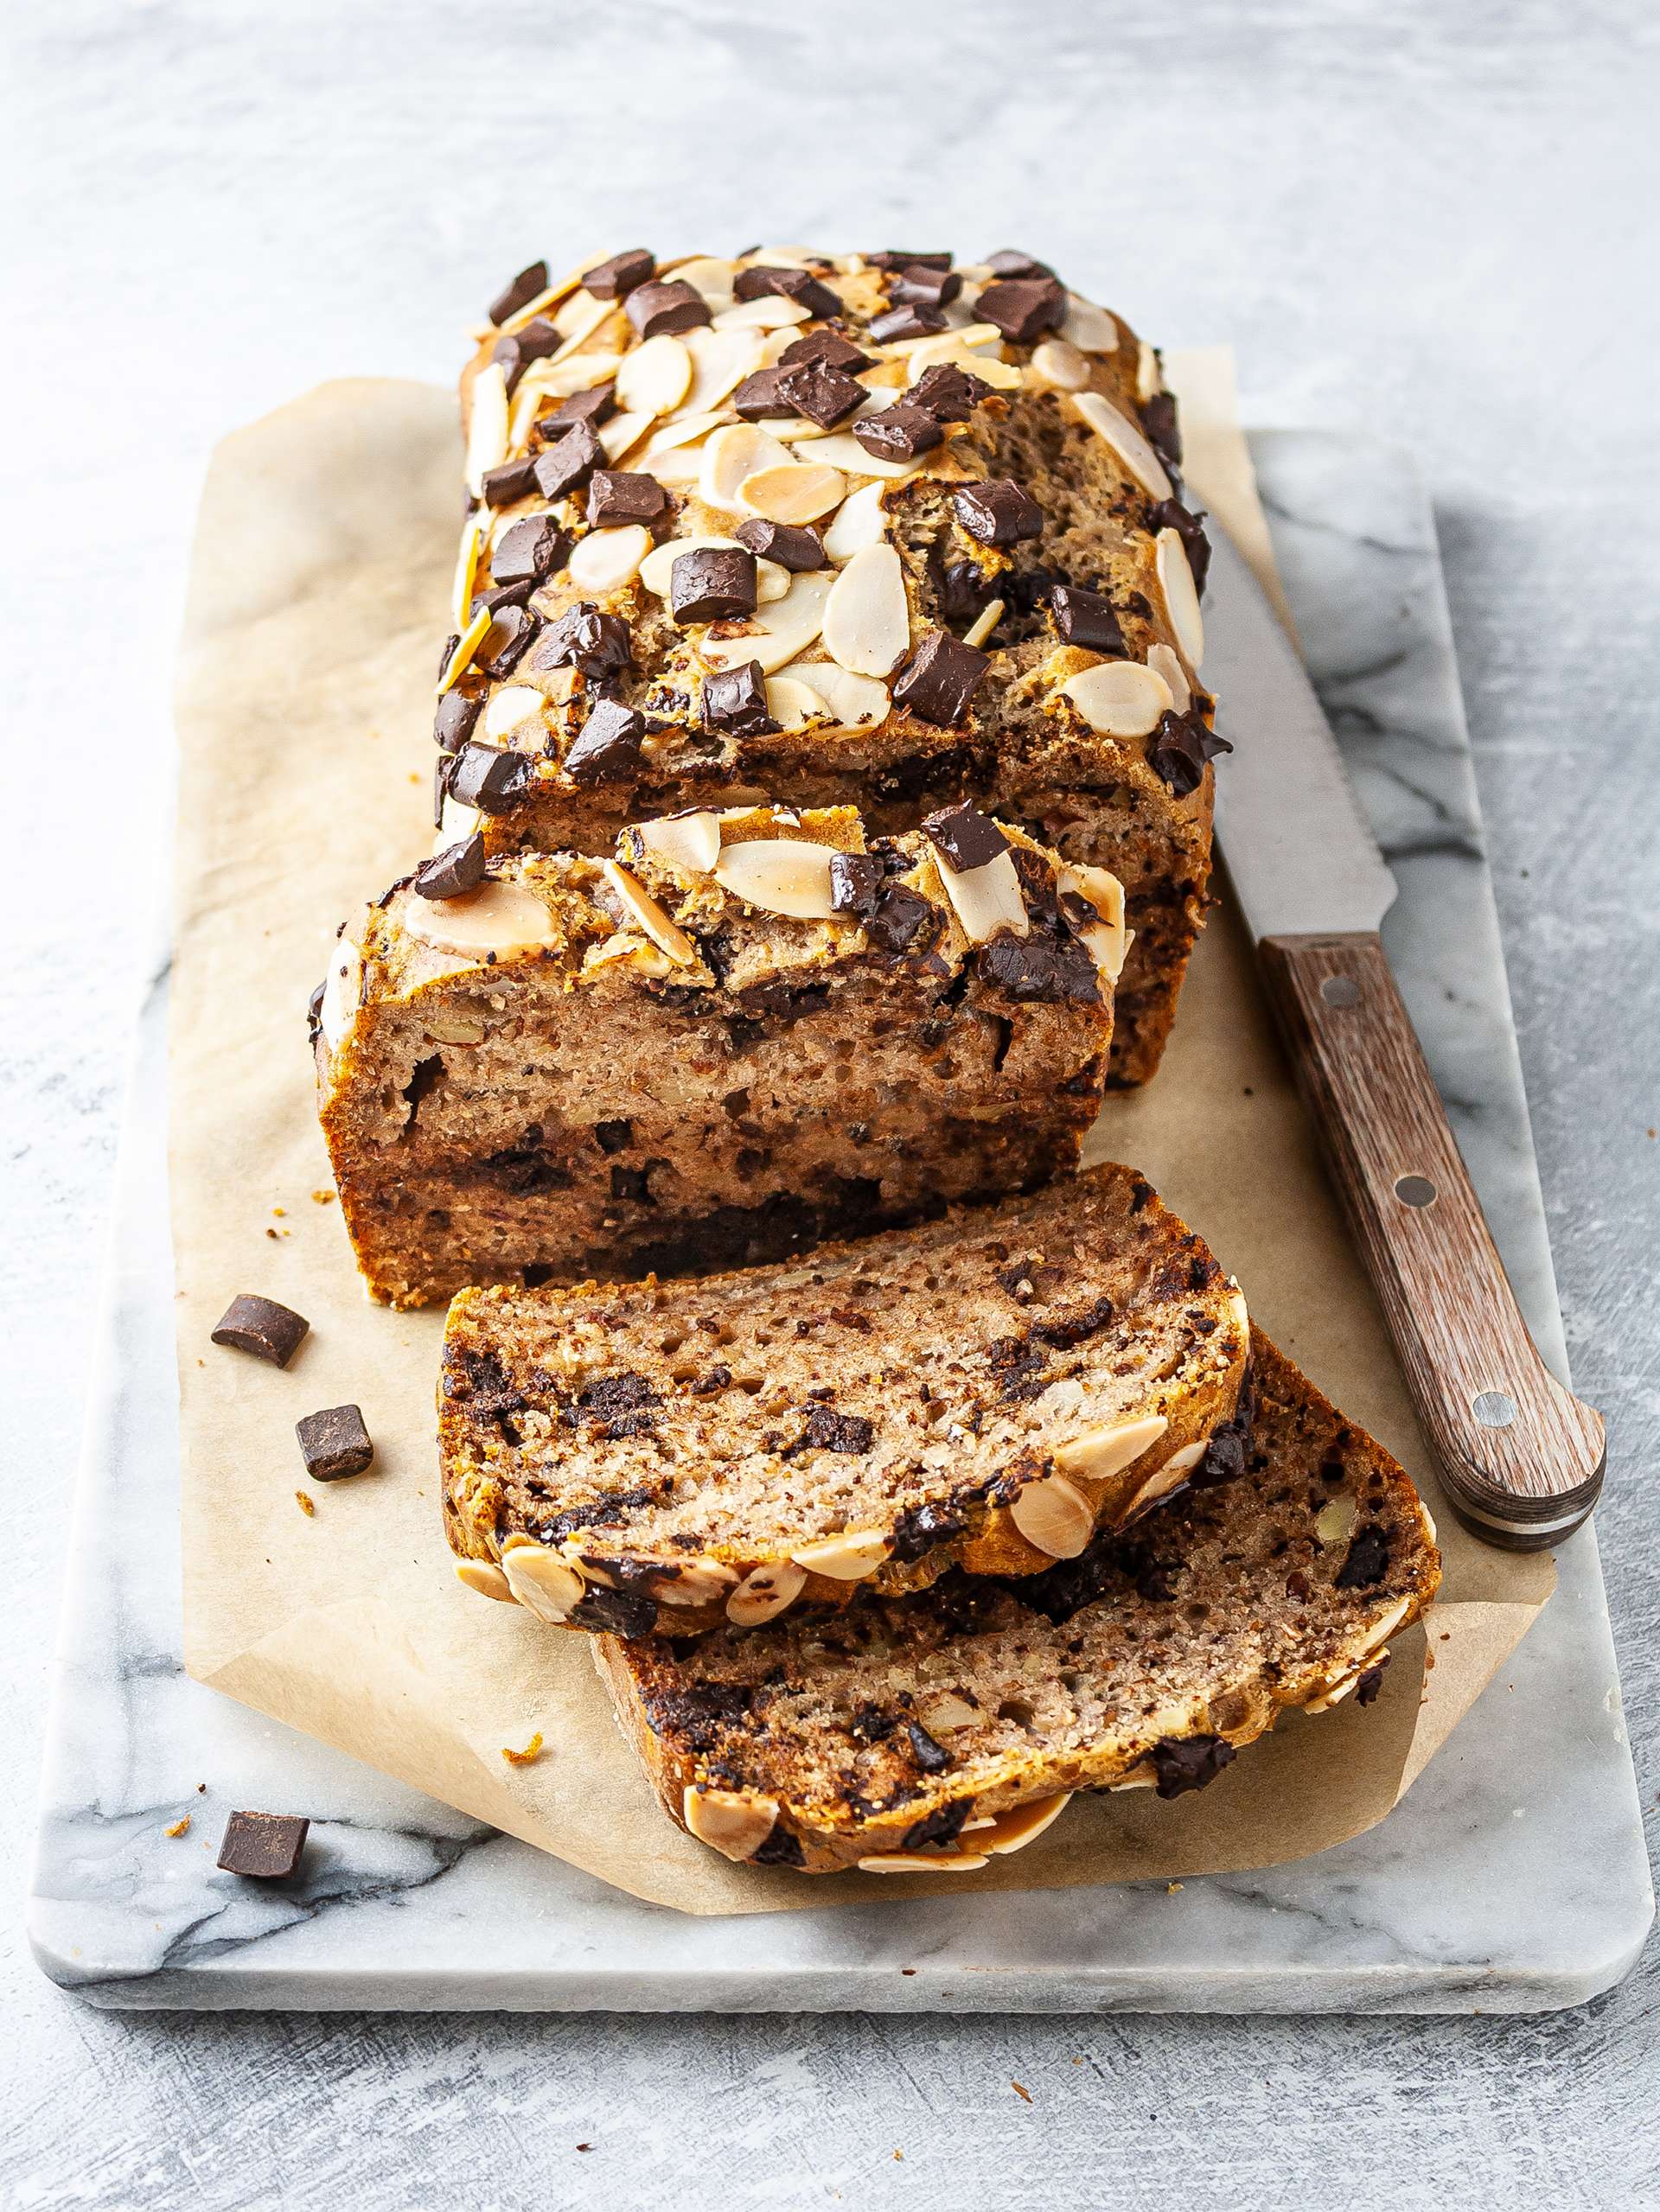 Banana Bread with Almond Milk and Chocolate Chips Recipe